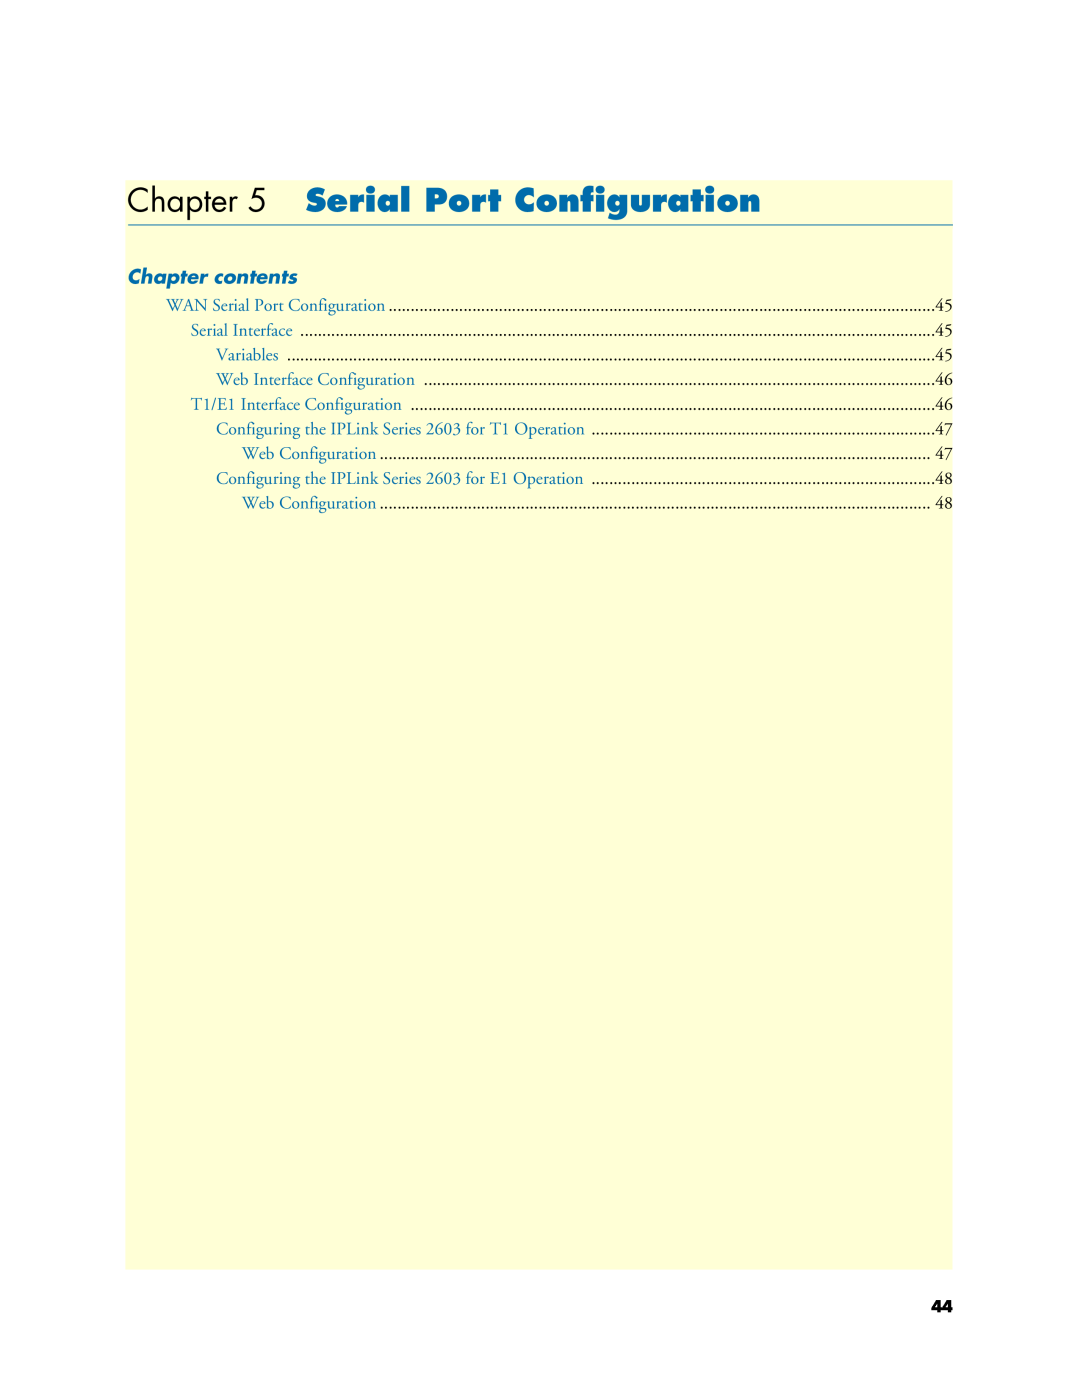 Patton electronic 2621, 2635 manual Serial Port Conﬁguration, Chapter contents 